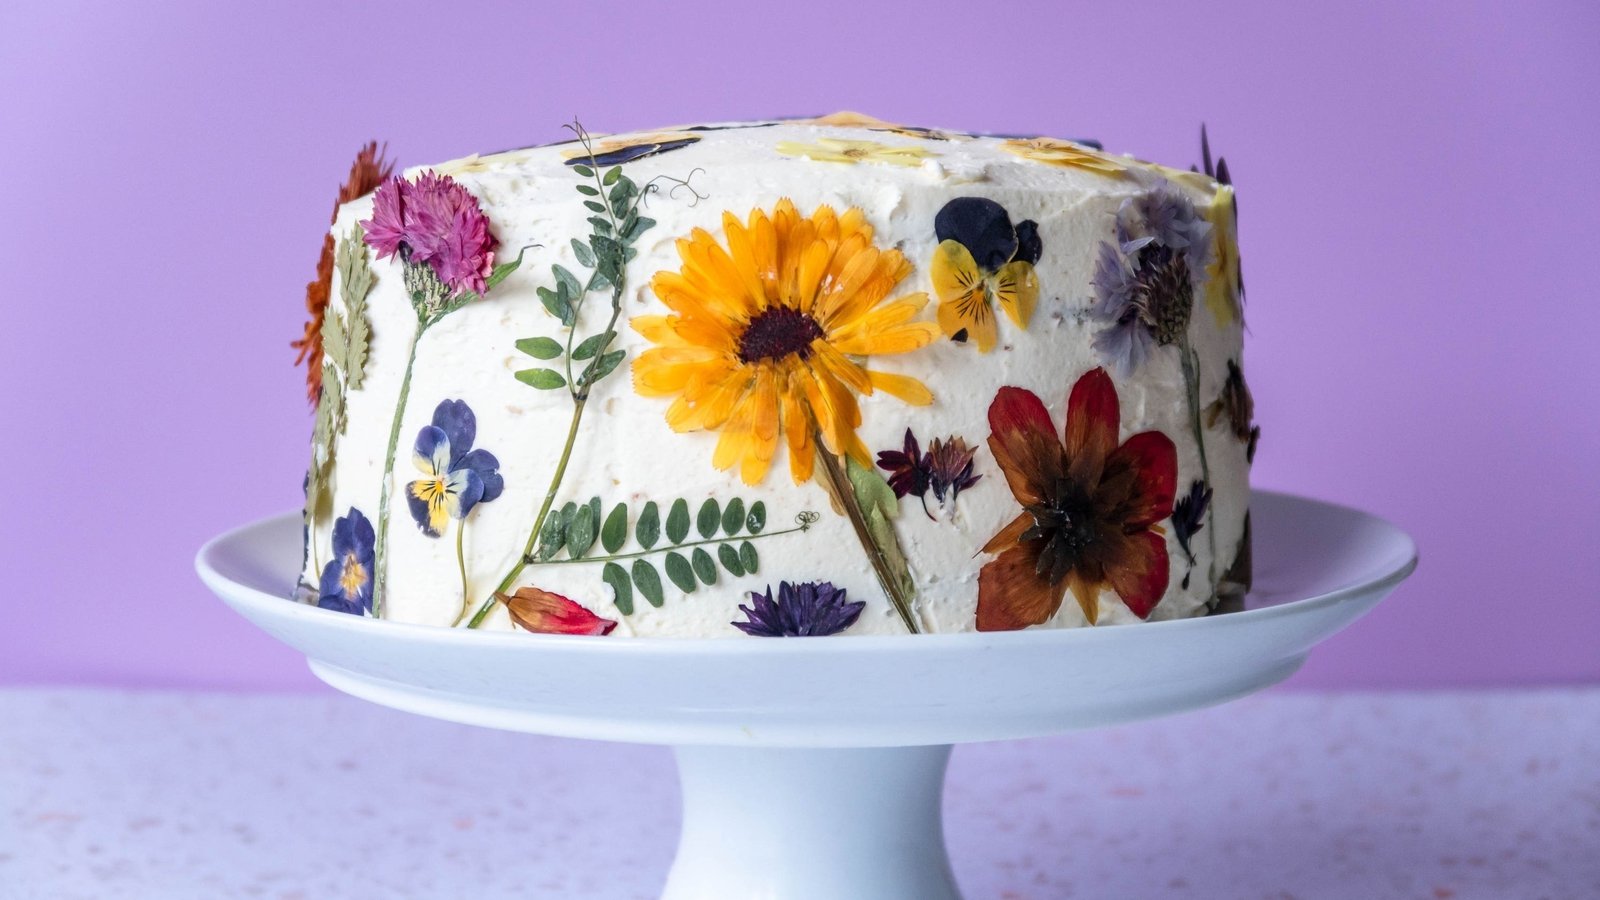 How to use edible flowers on cakes and in cocktails